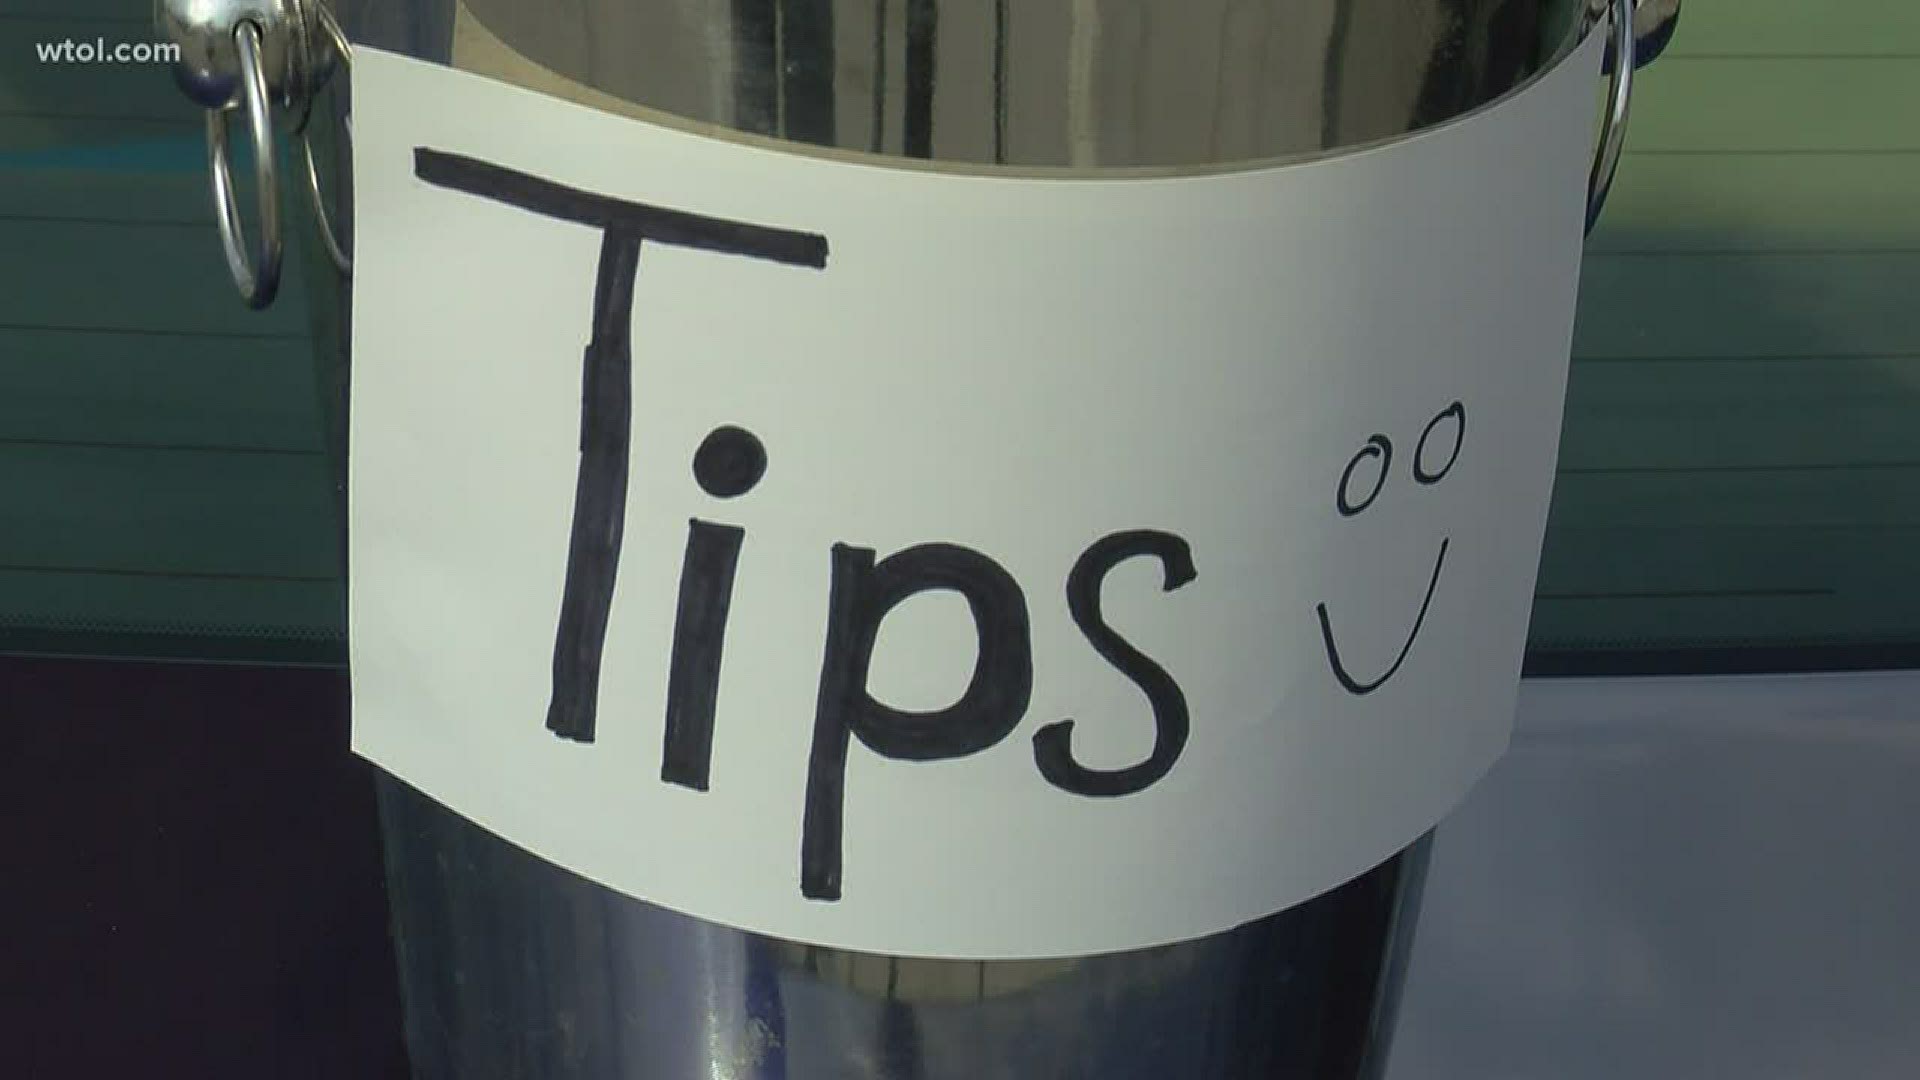 The Toledo Tip Jar was inspired by a similar effort in Cleveland.